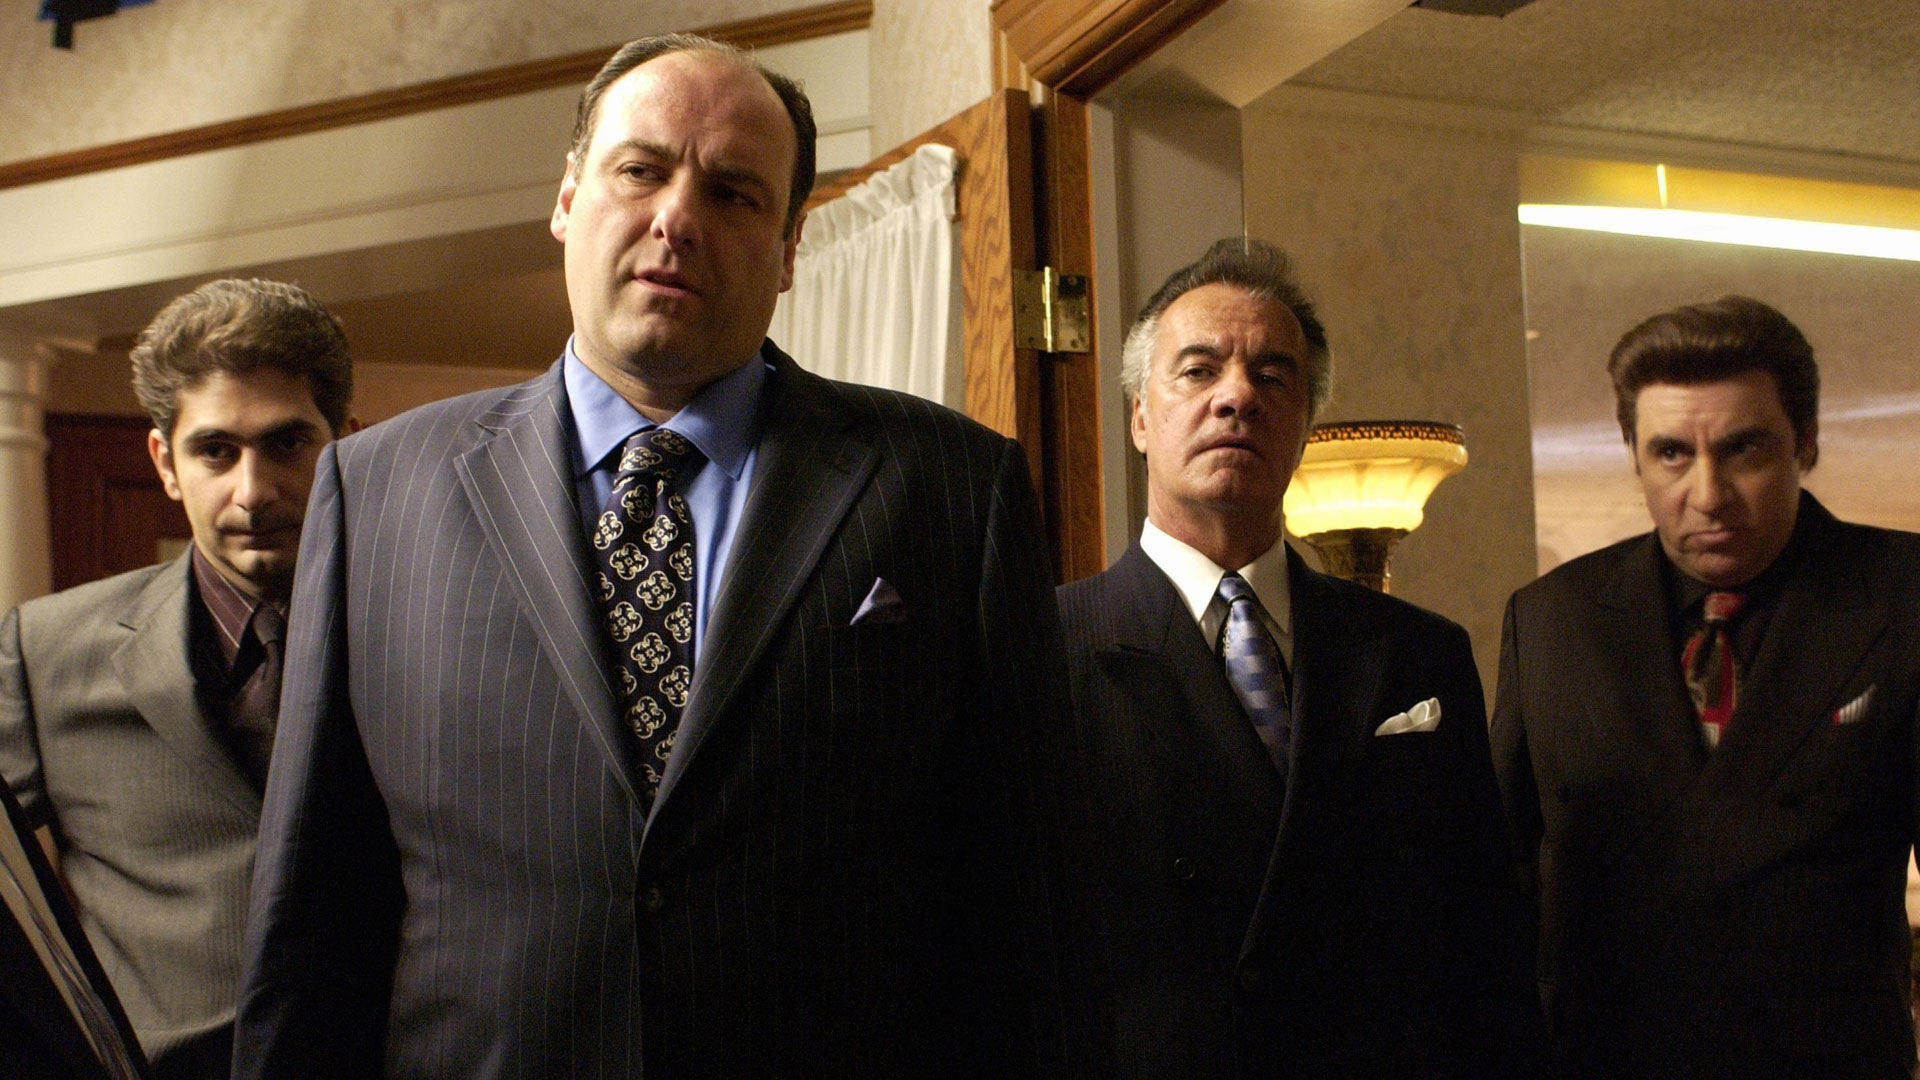 The Sopranos on HBO